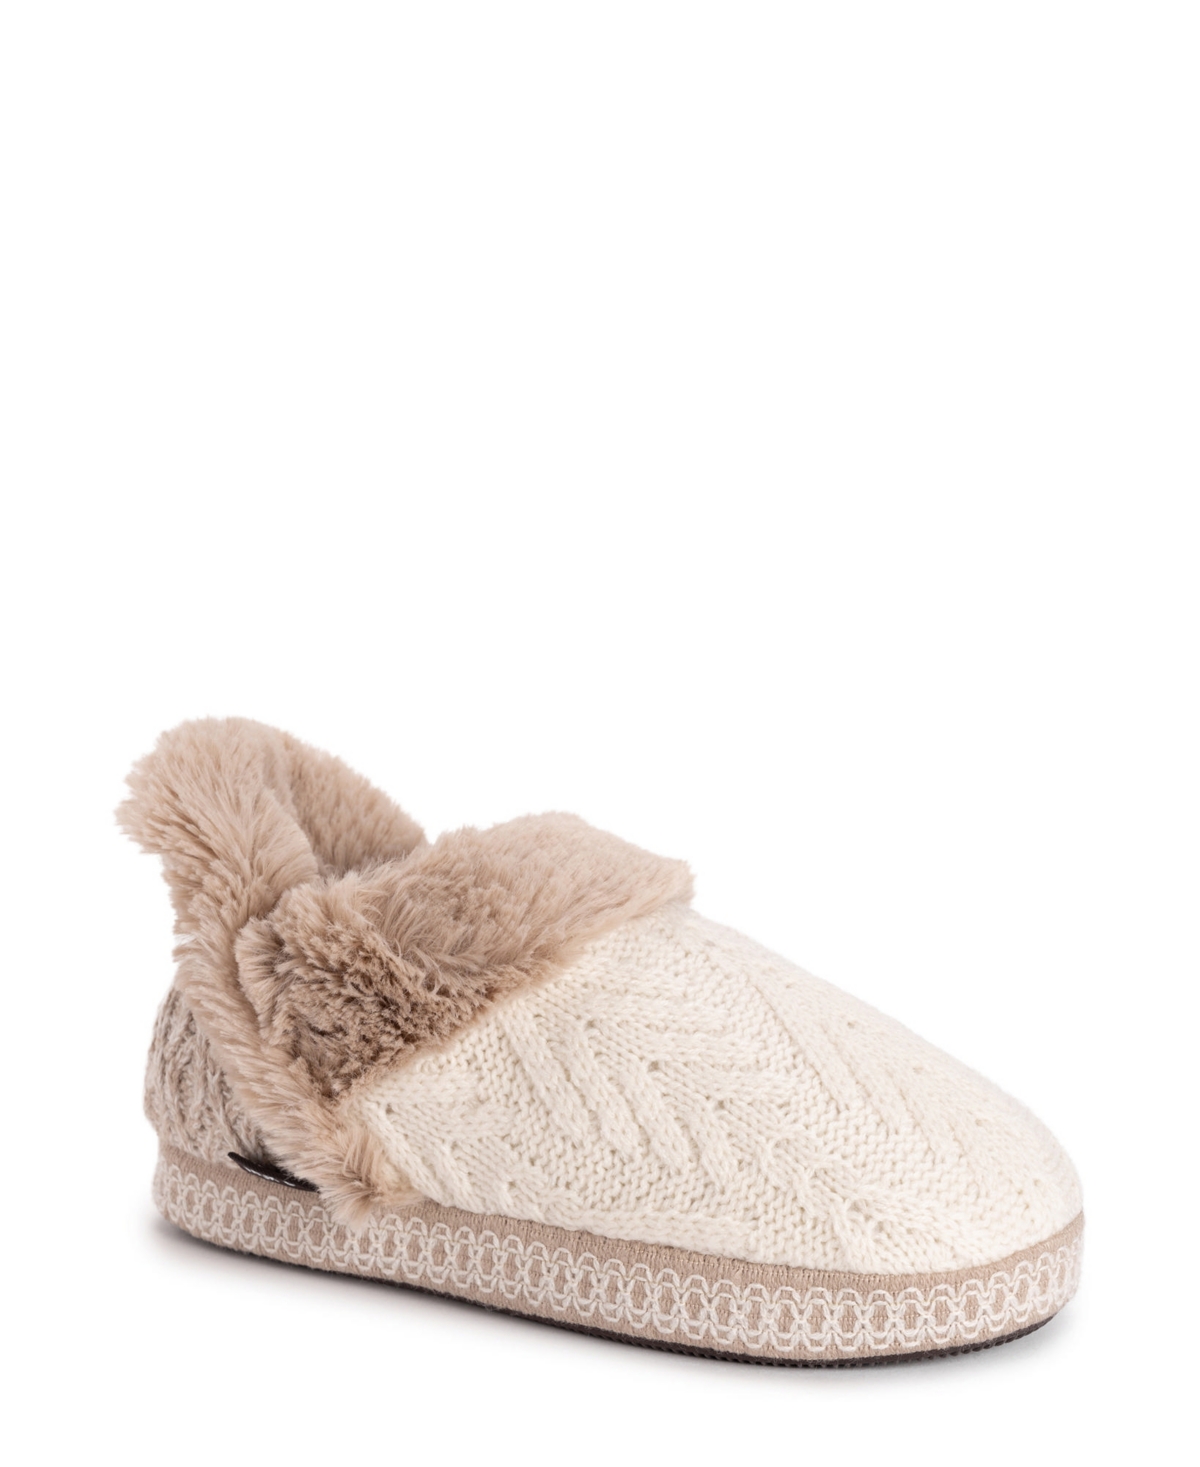 Women's Magdalena Slippers - Ivory, Fairy Dust